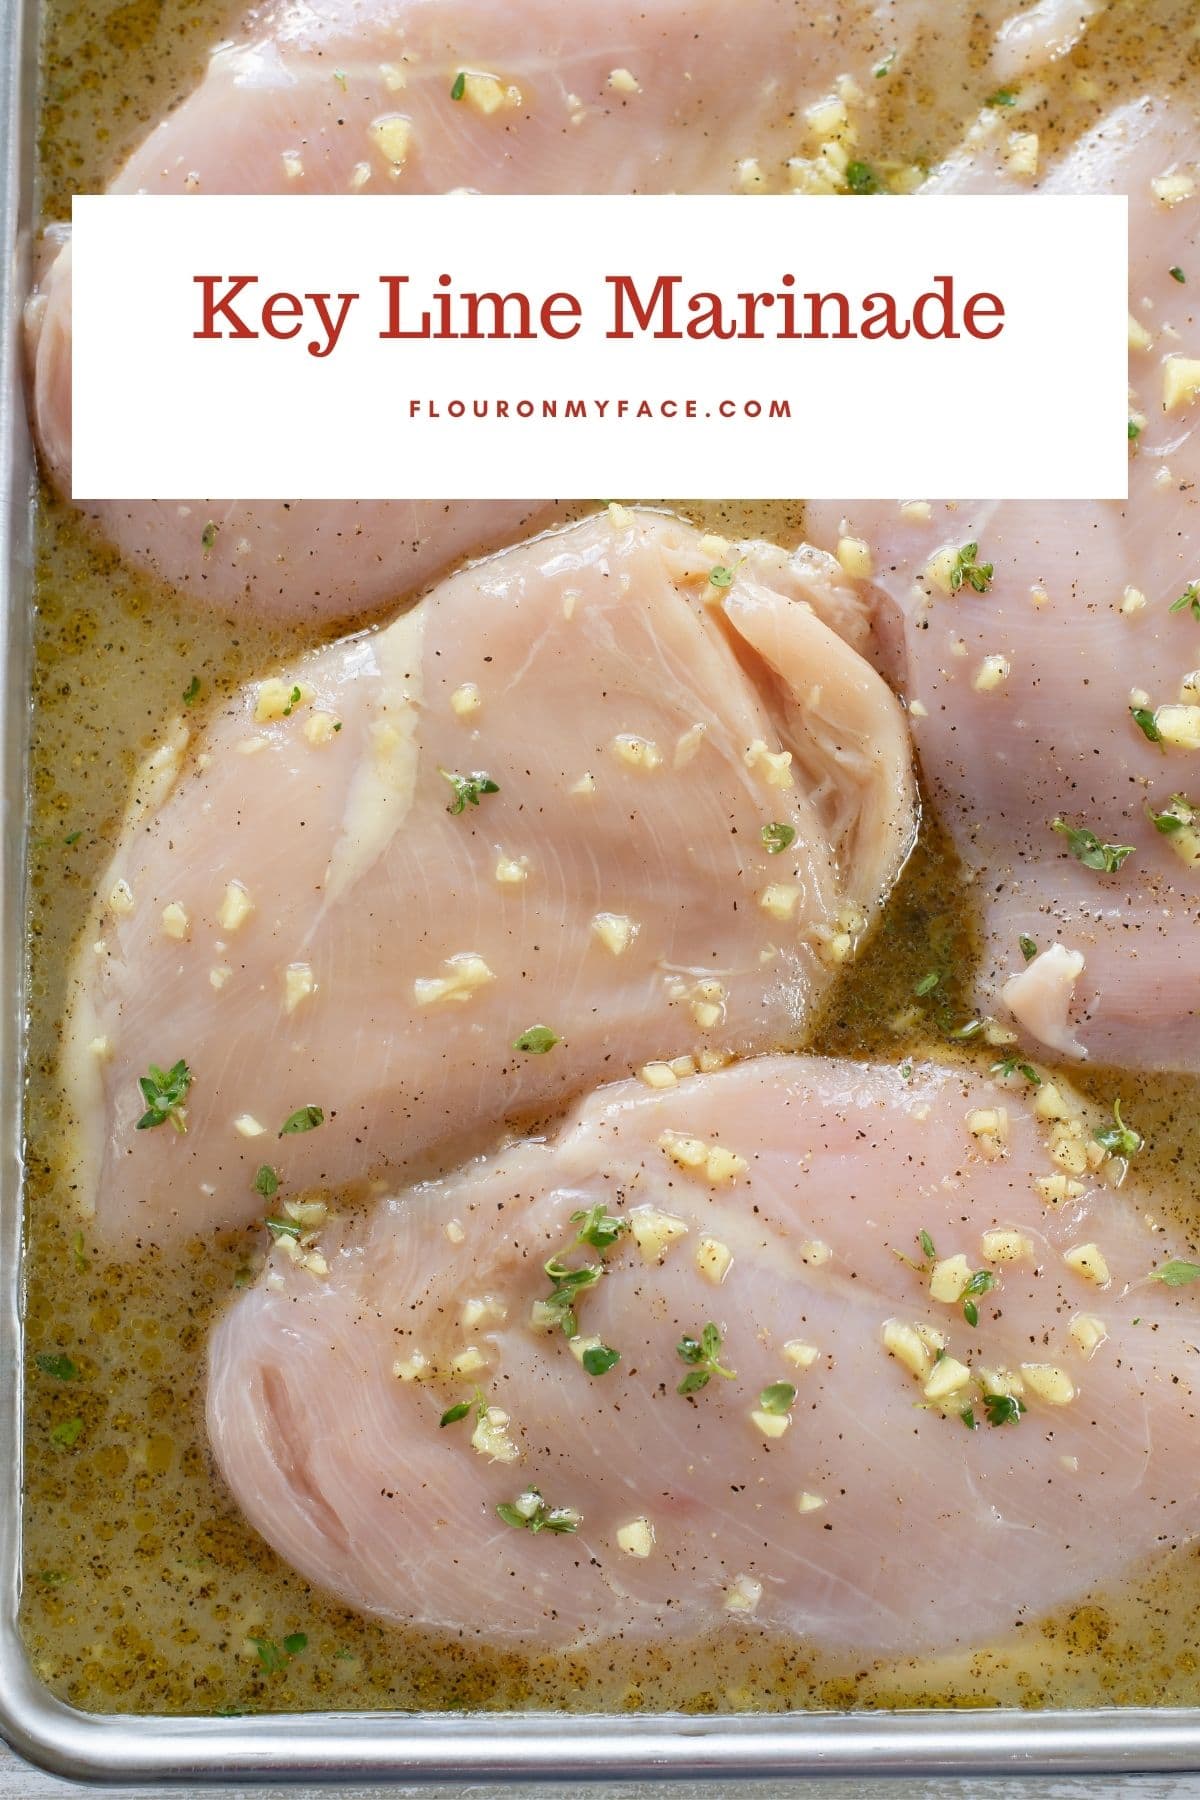 Boneless skinless chicken breasts marinating in key lime juice and garlic marinade.